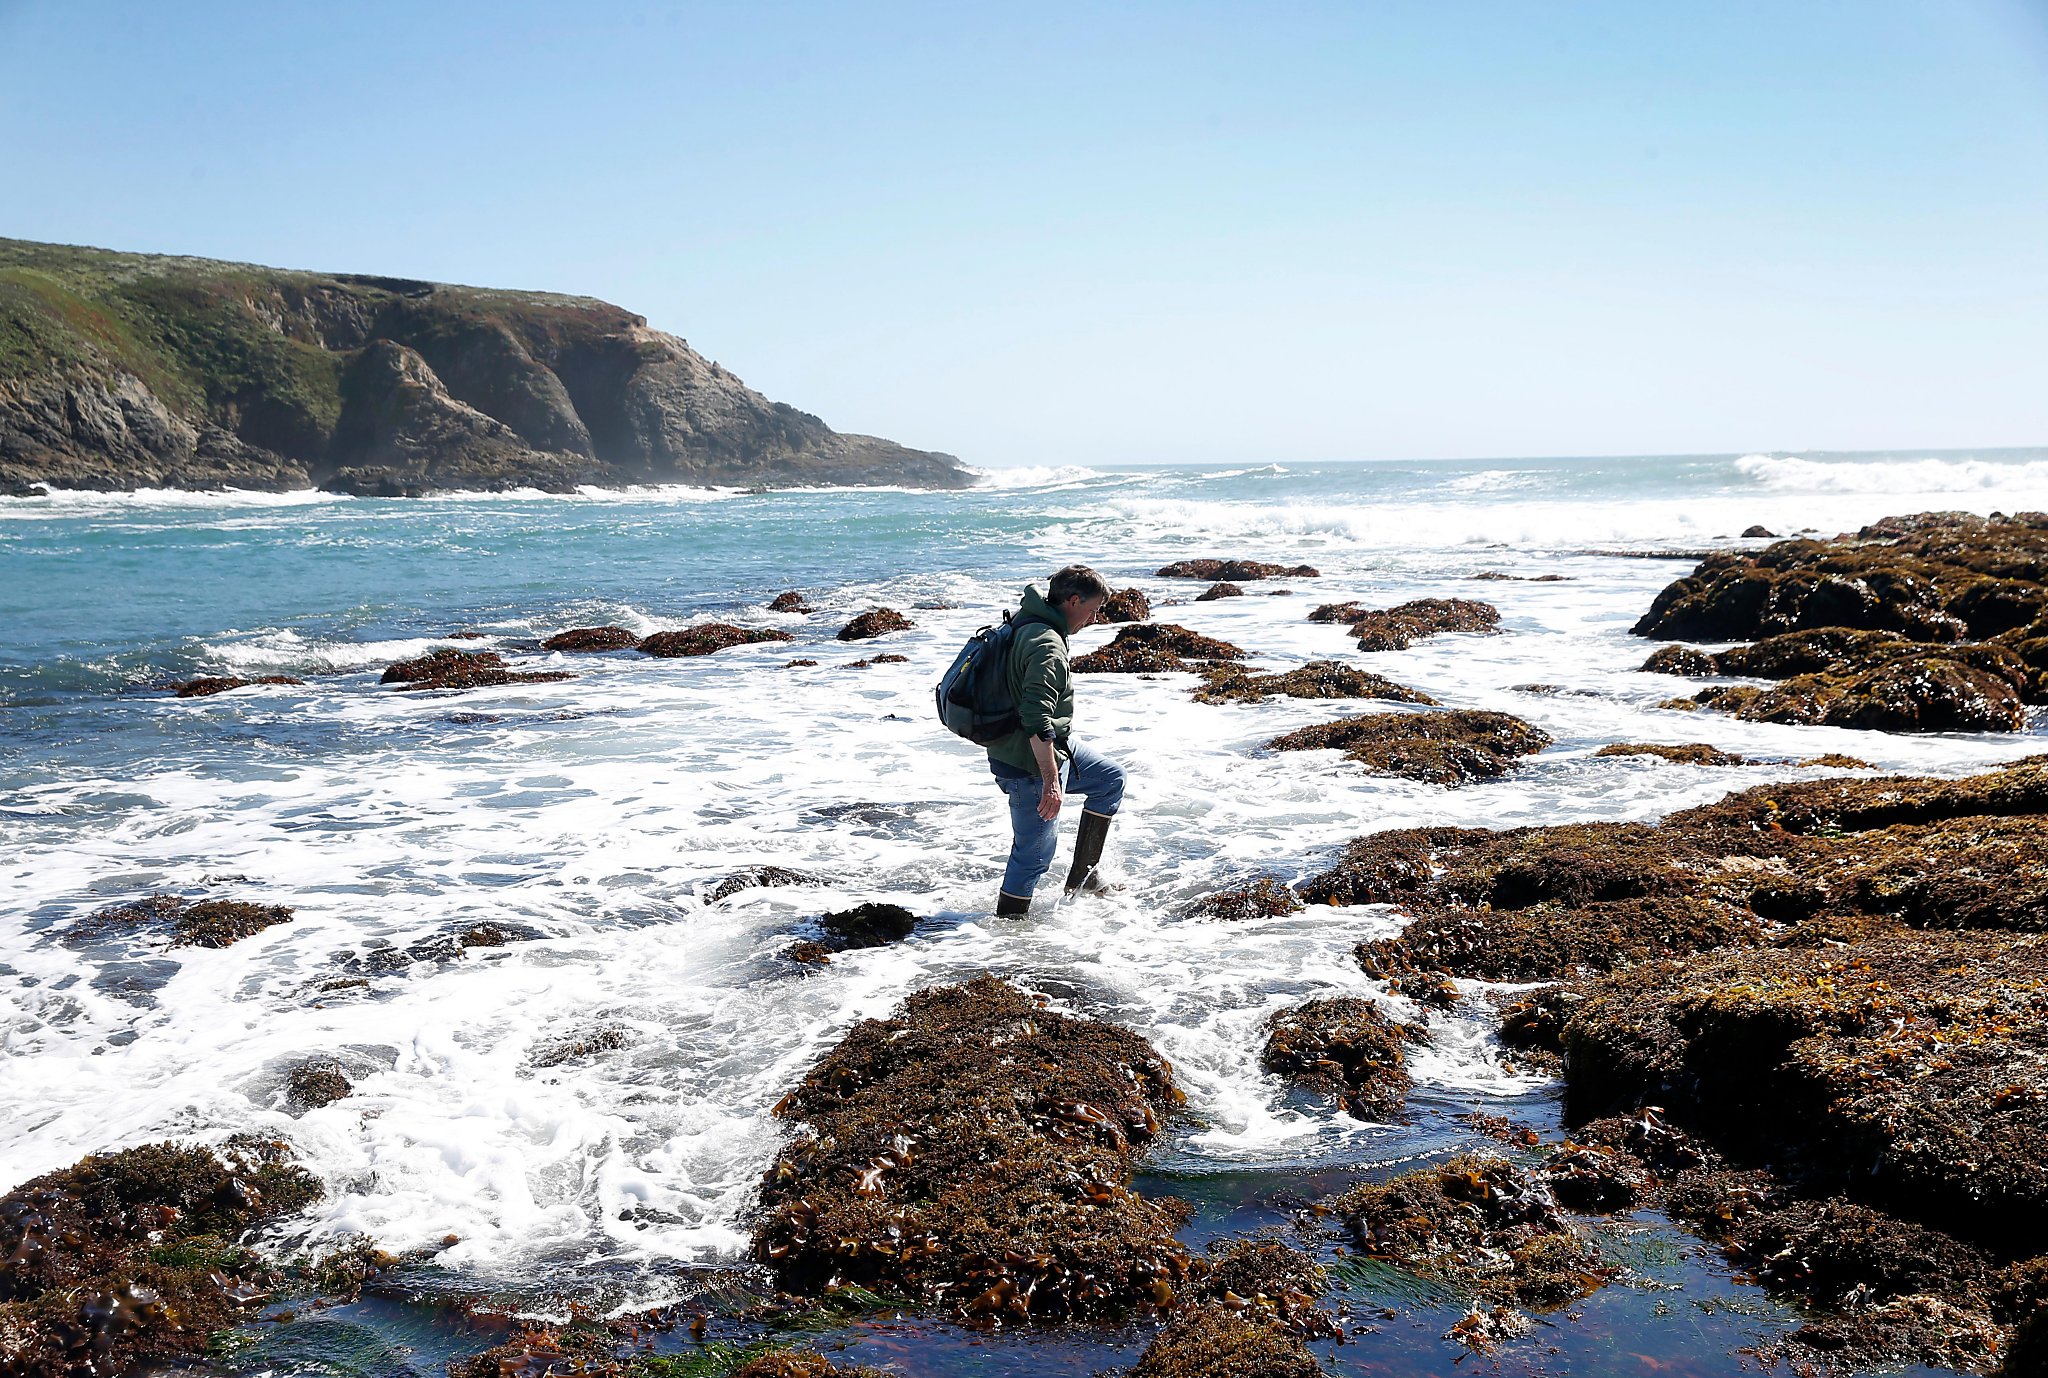 Bodega Bay tide pools show effects of climate change - San Francisco Chronicle